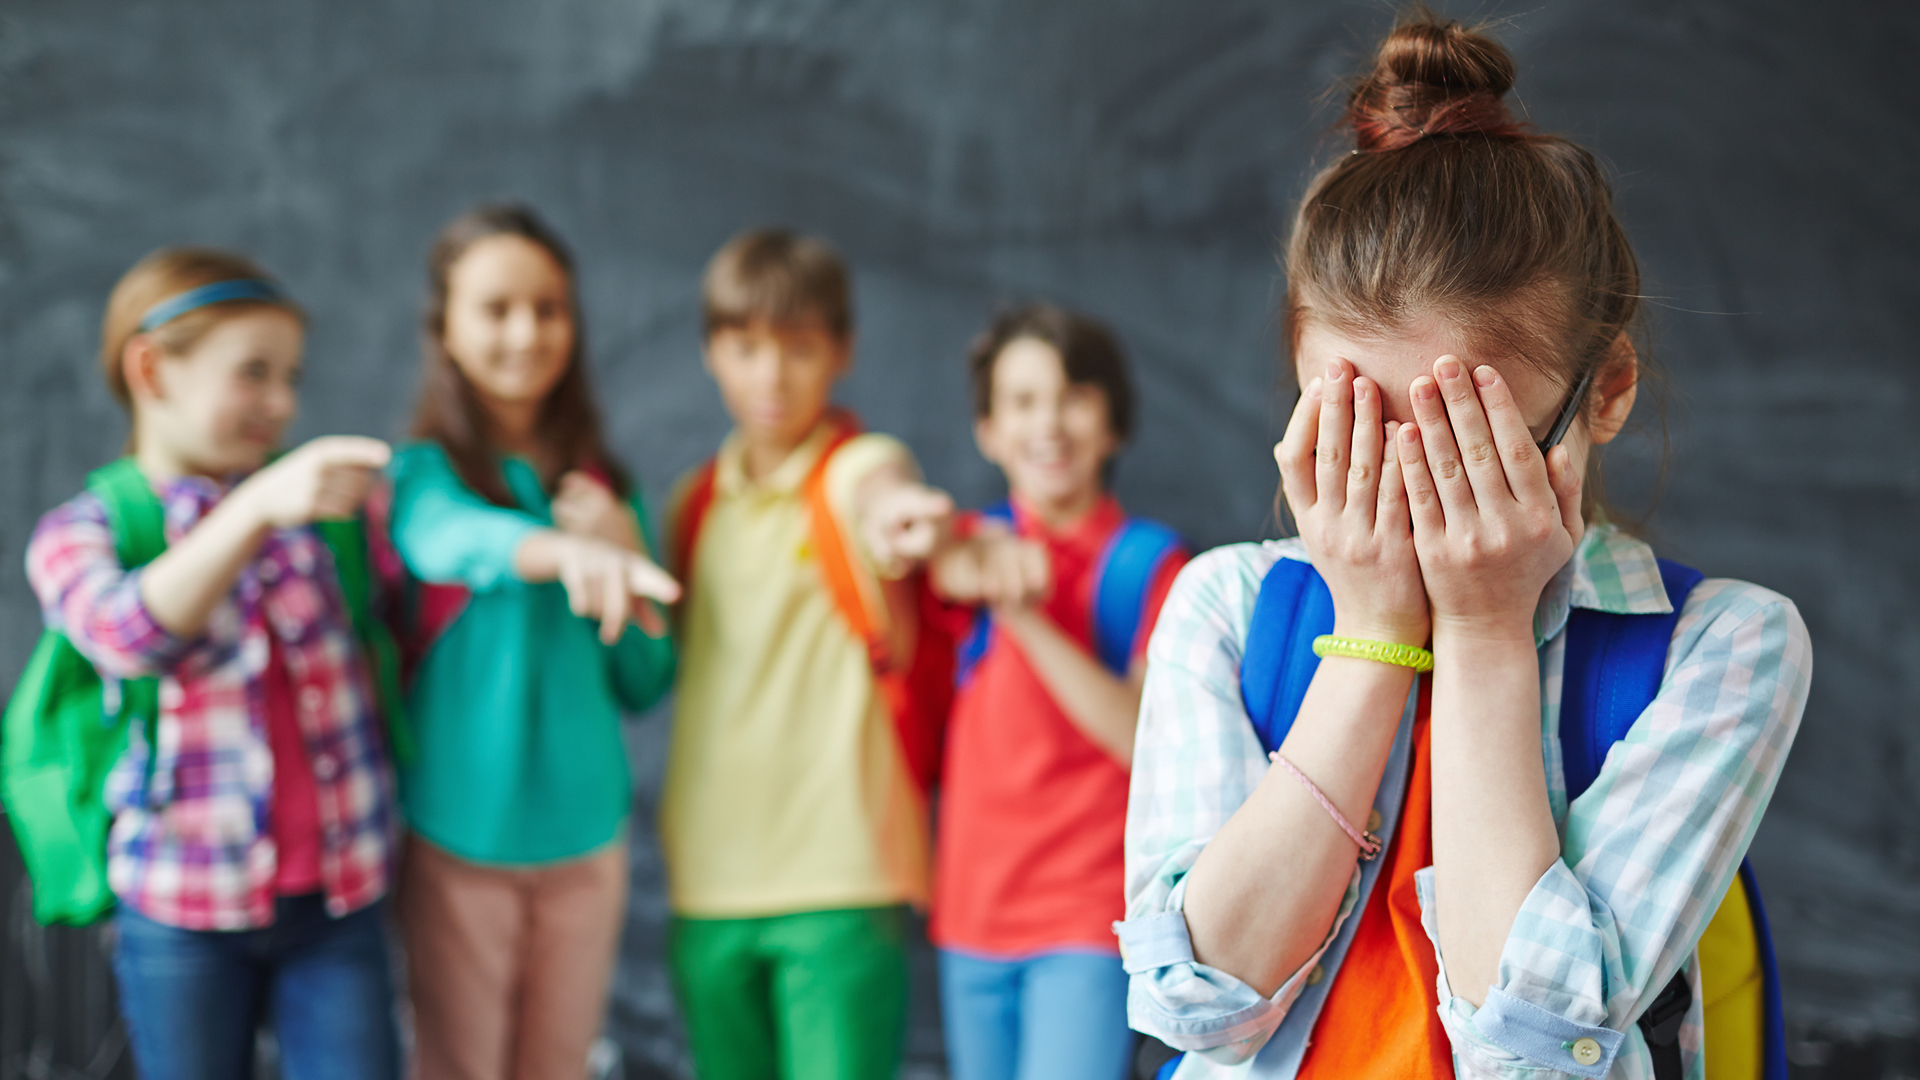 Some 250 million kids around the world could be victims of violence in and around their schools, UNESCO warned / (iStock)